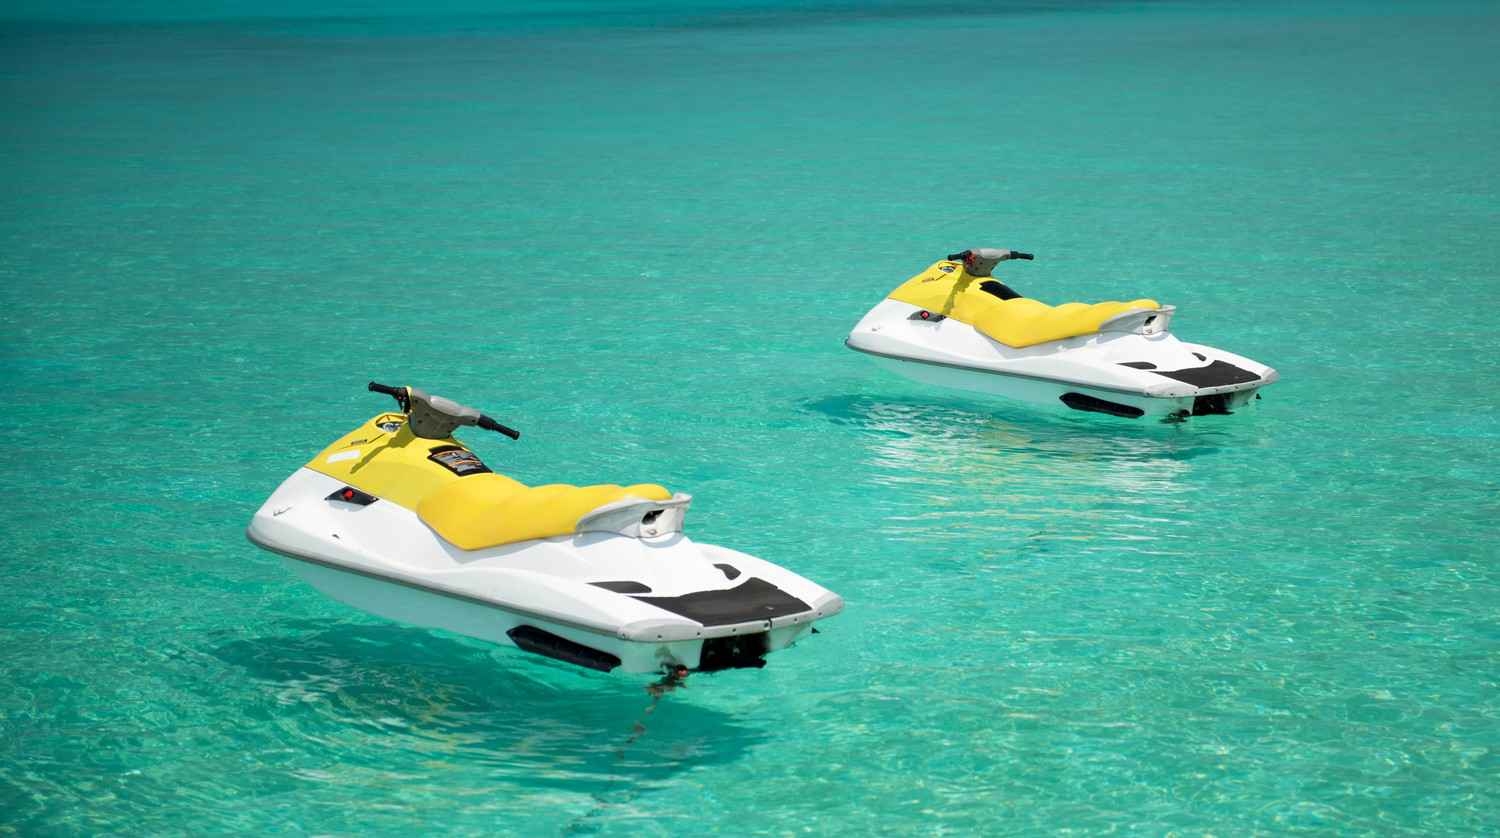 Two jet skis in crystal clear water.